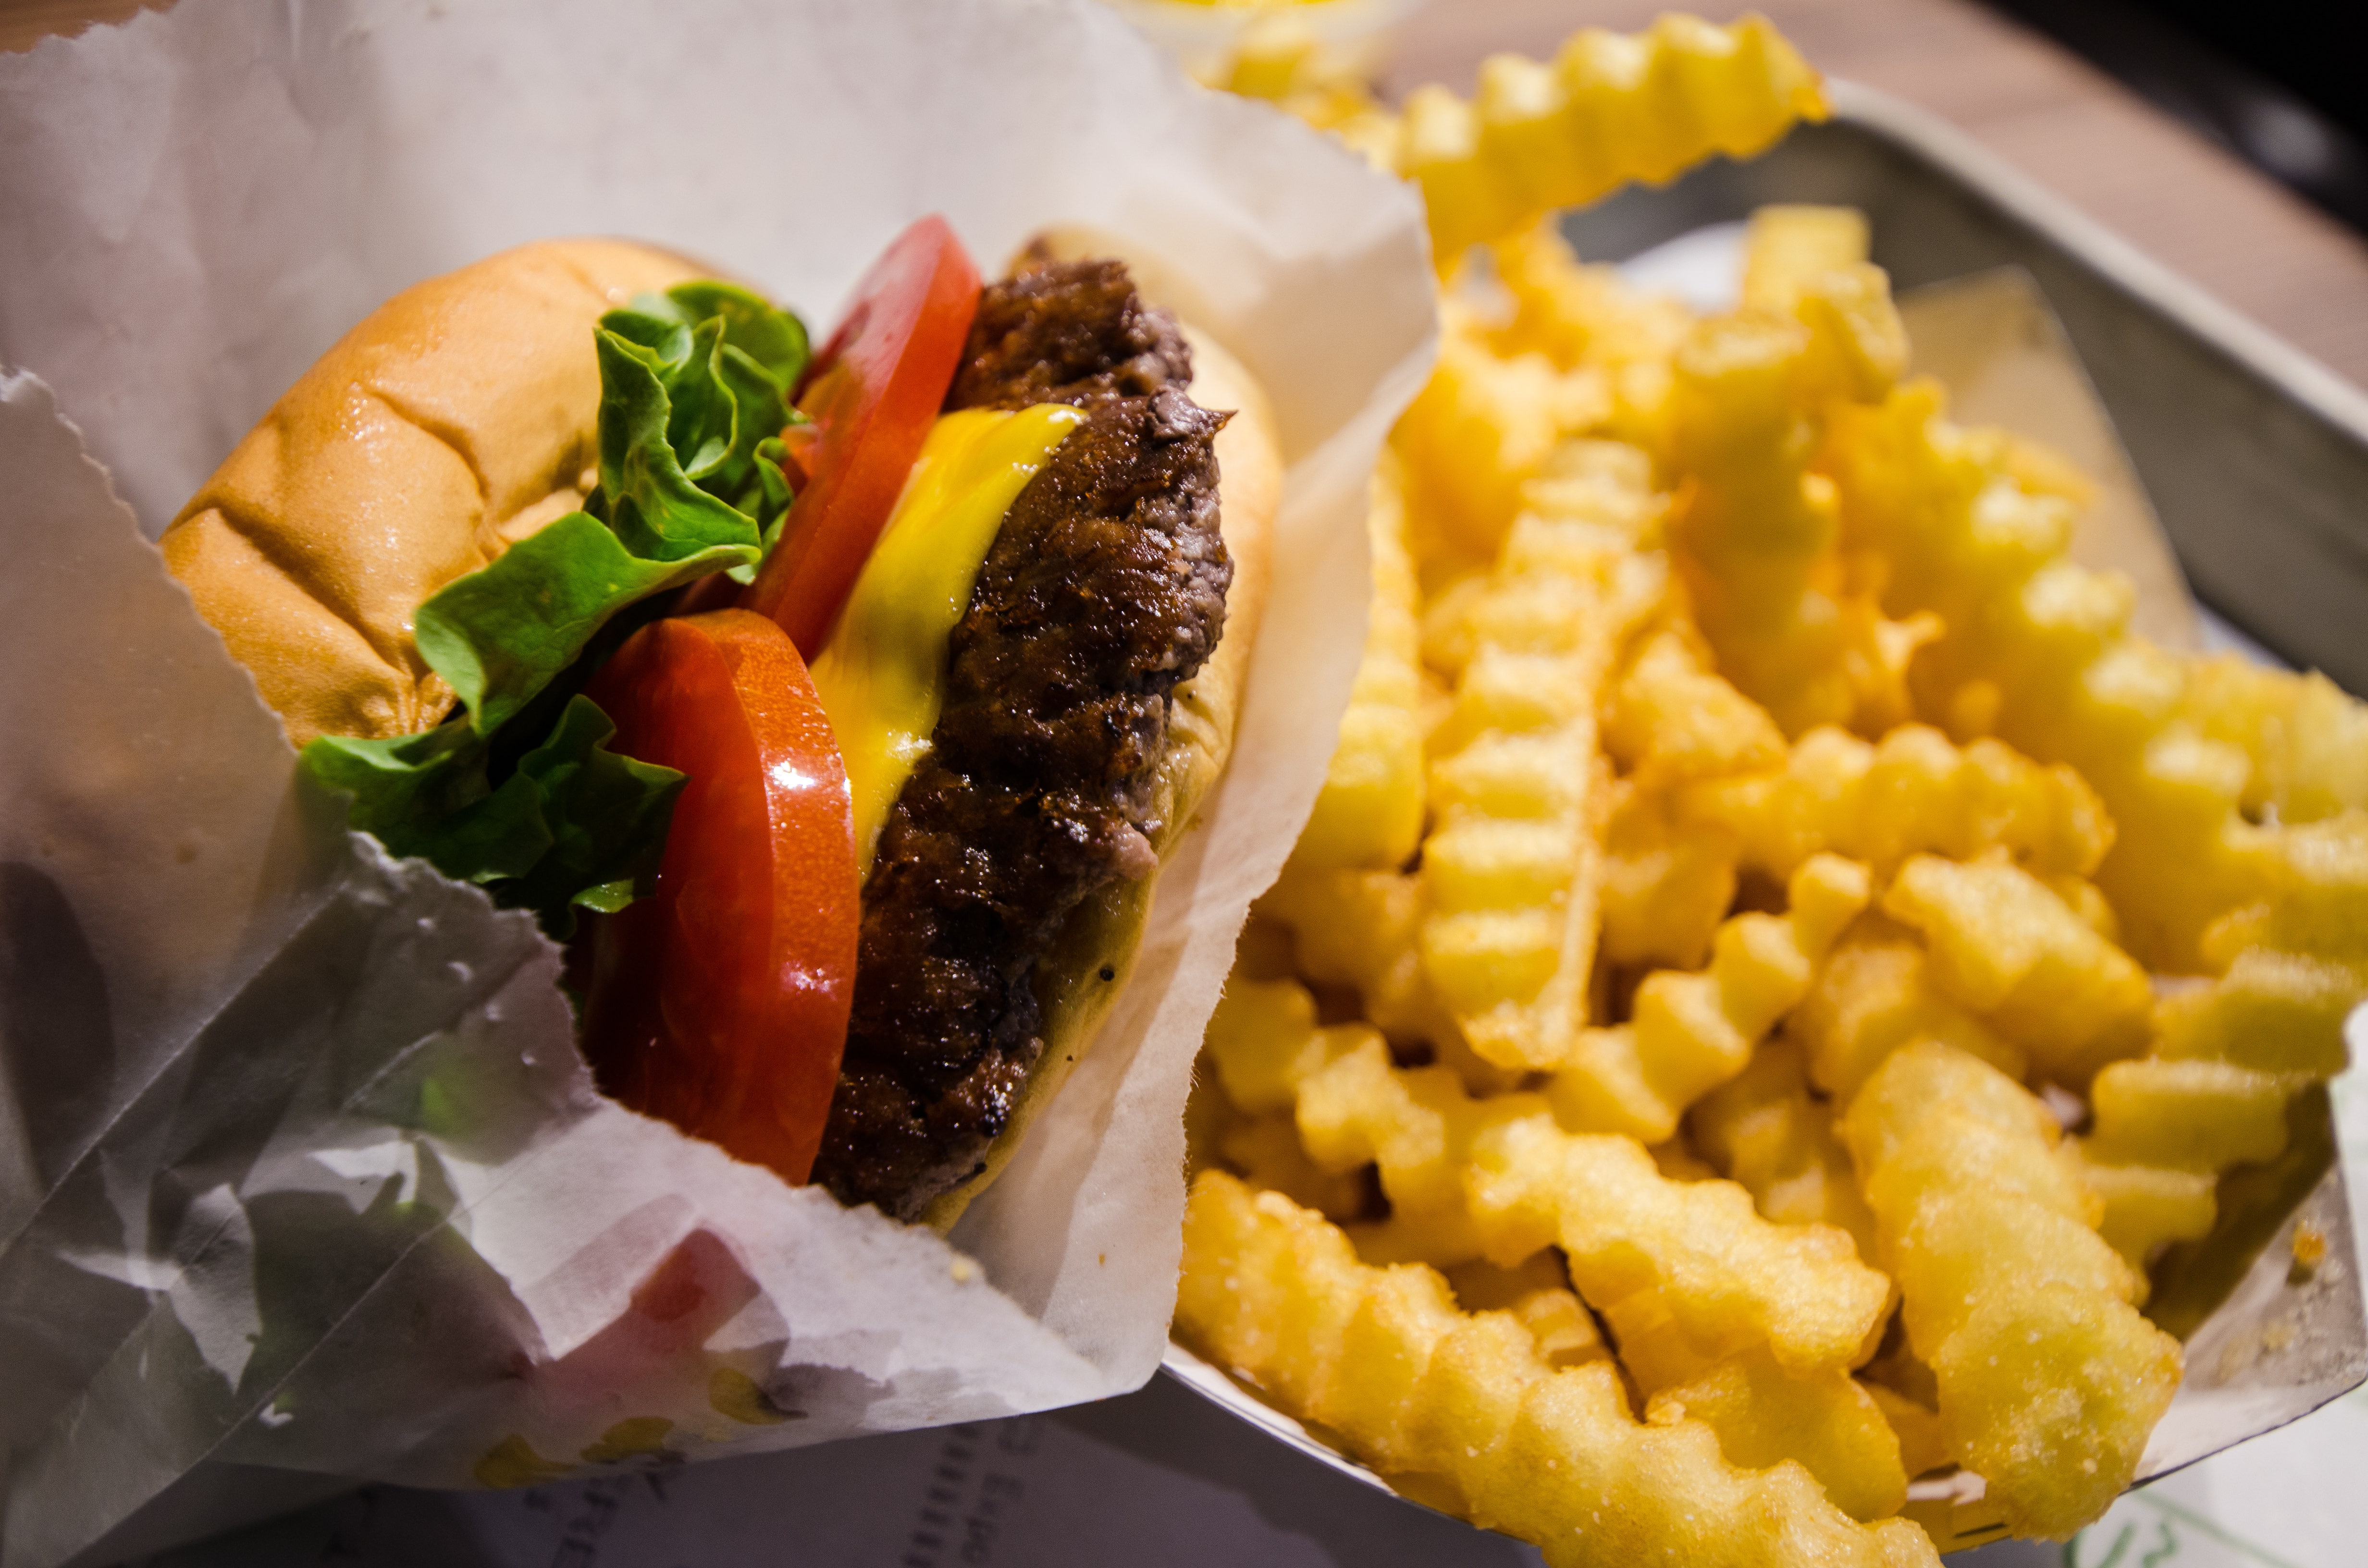 The Street Agrees: Shake Shack Delivered Tasty Q2, But Valuation Is Full